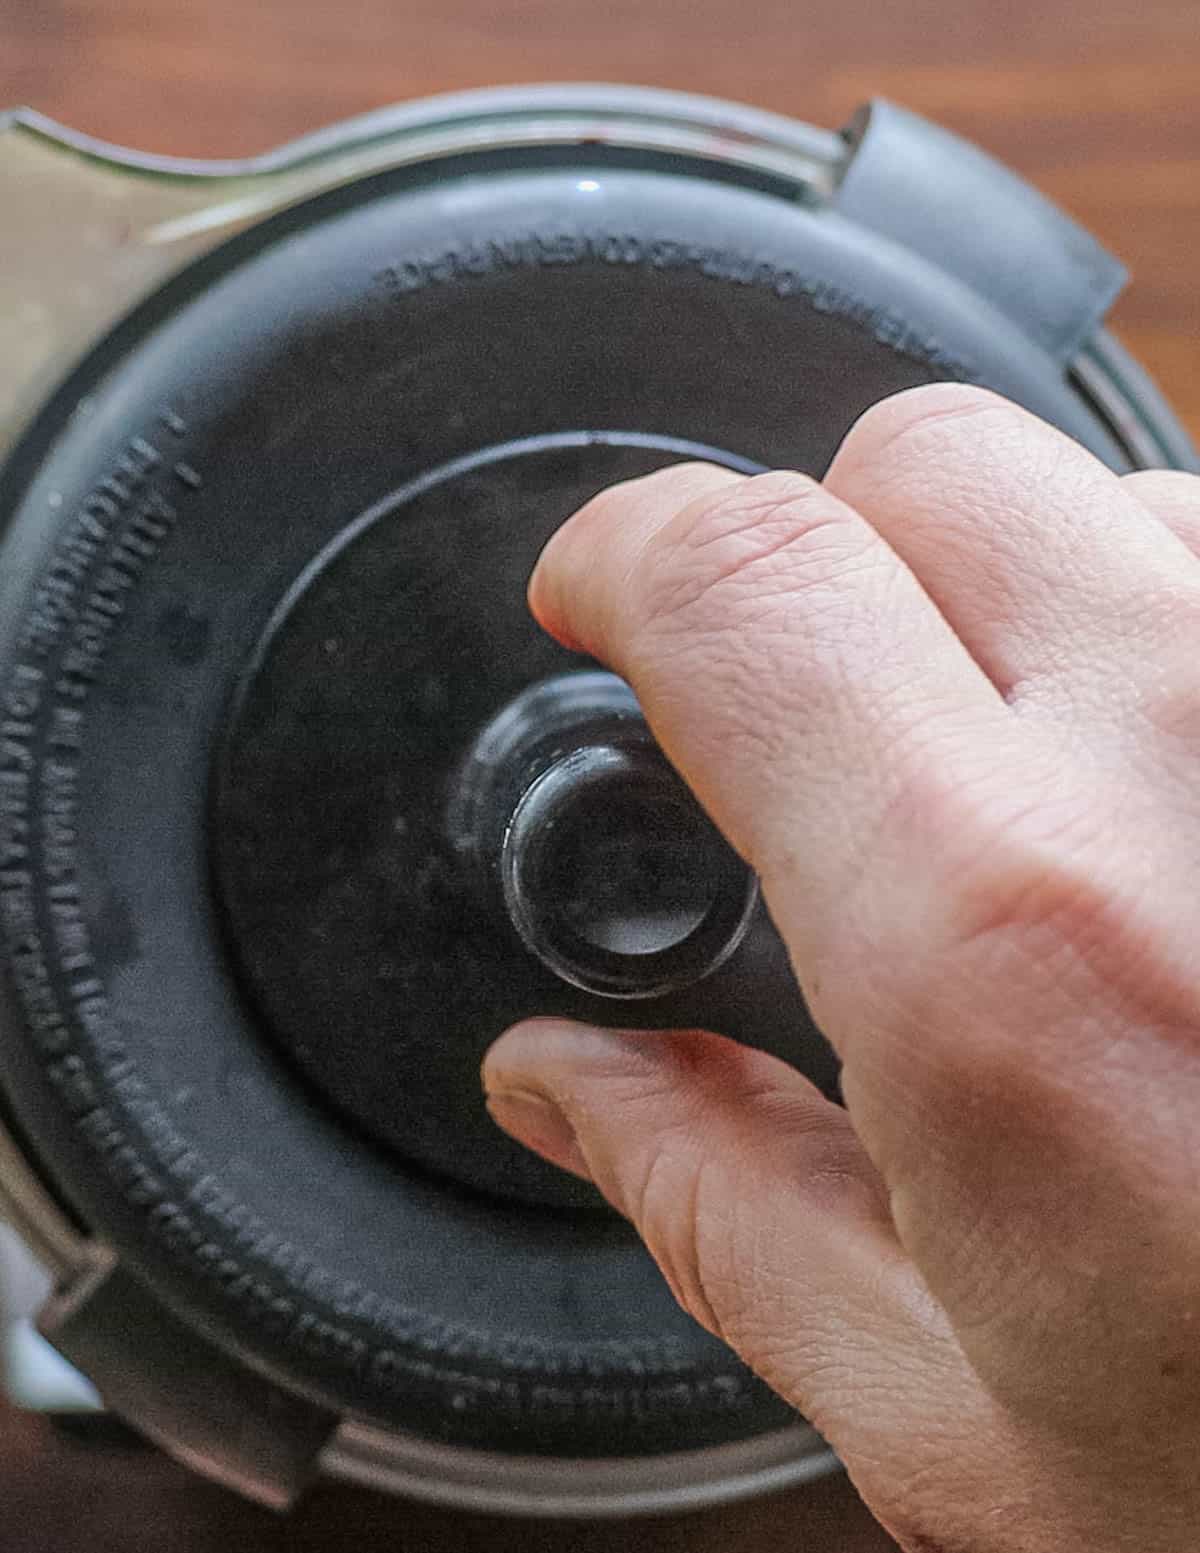 A hand holding the tamper attachment of a highspeed blender while pureeing blueberry sauce.